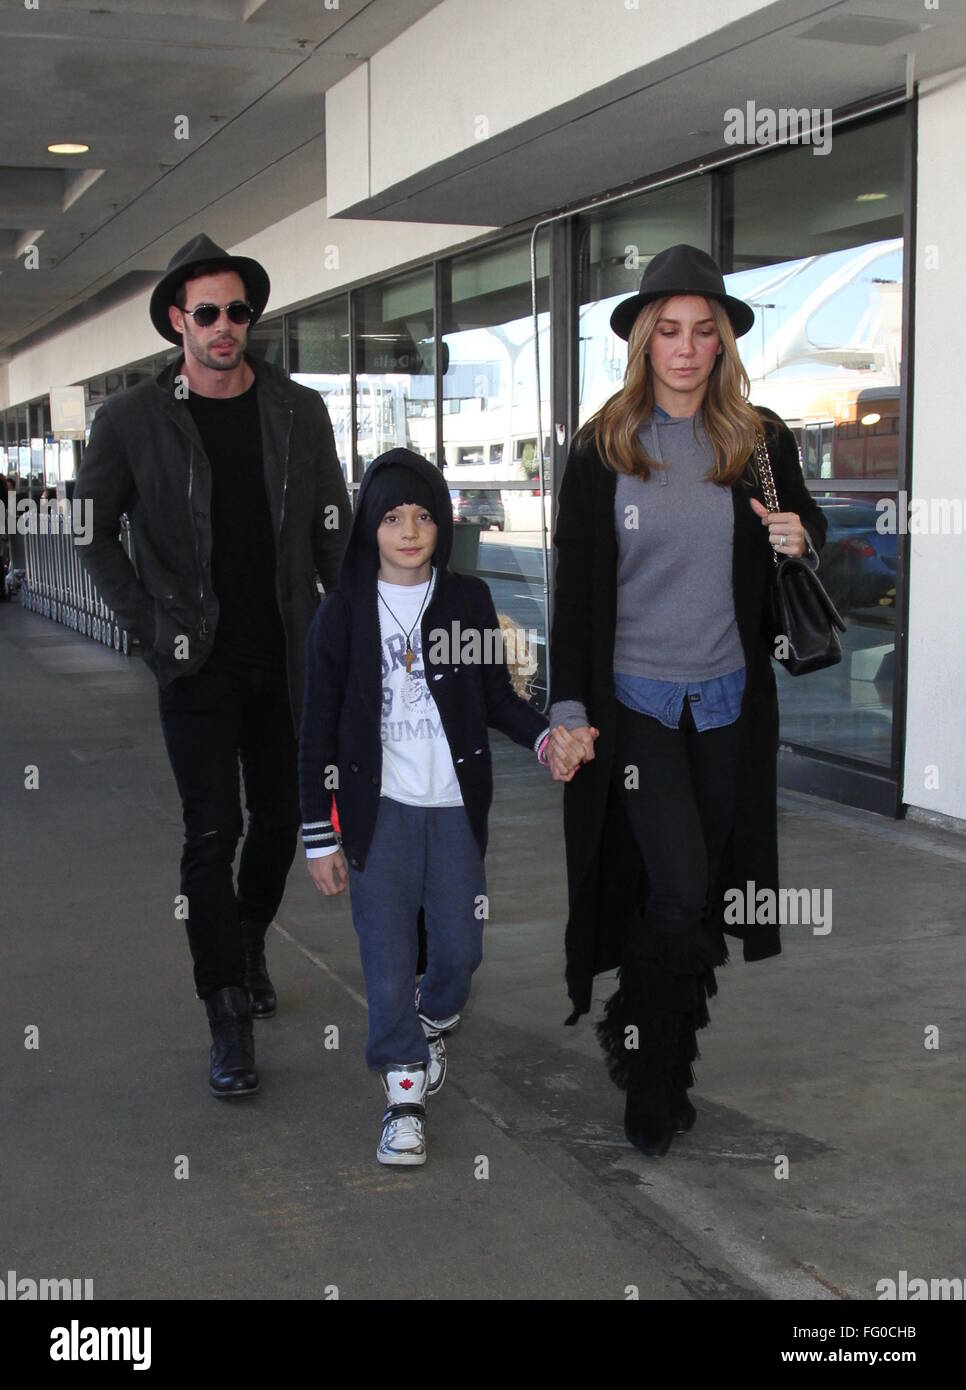 William Levy arrives at Los Angeles International Airport (LAX) with  Elizabeth Gutierrez and their children, Christopher and Kailey Featuring:  William Levy, Elizabeth Gutiérrez, Christopher Alexander Levy Where: Los  Angeles, California, United States